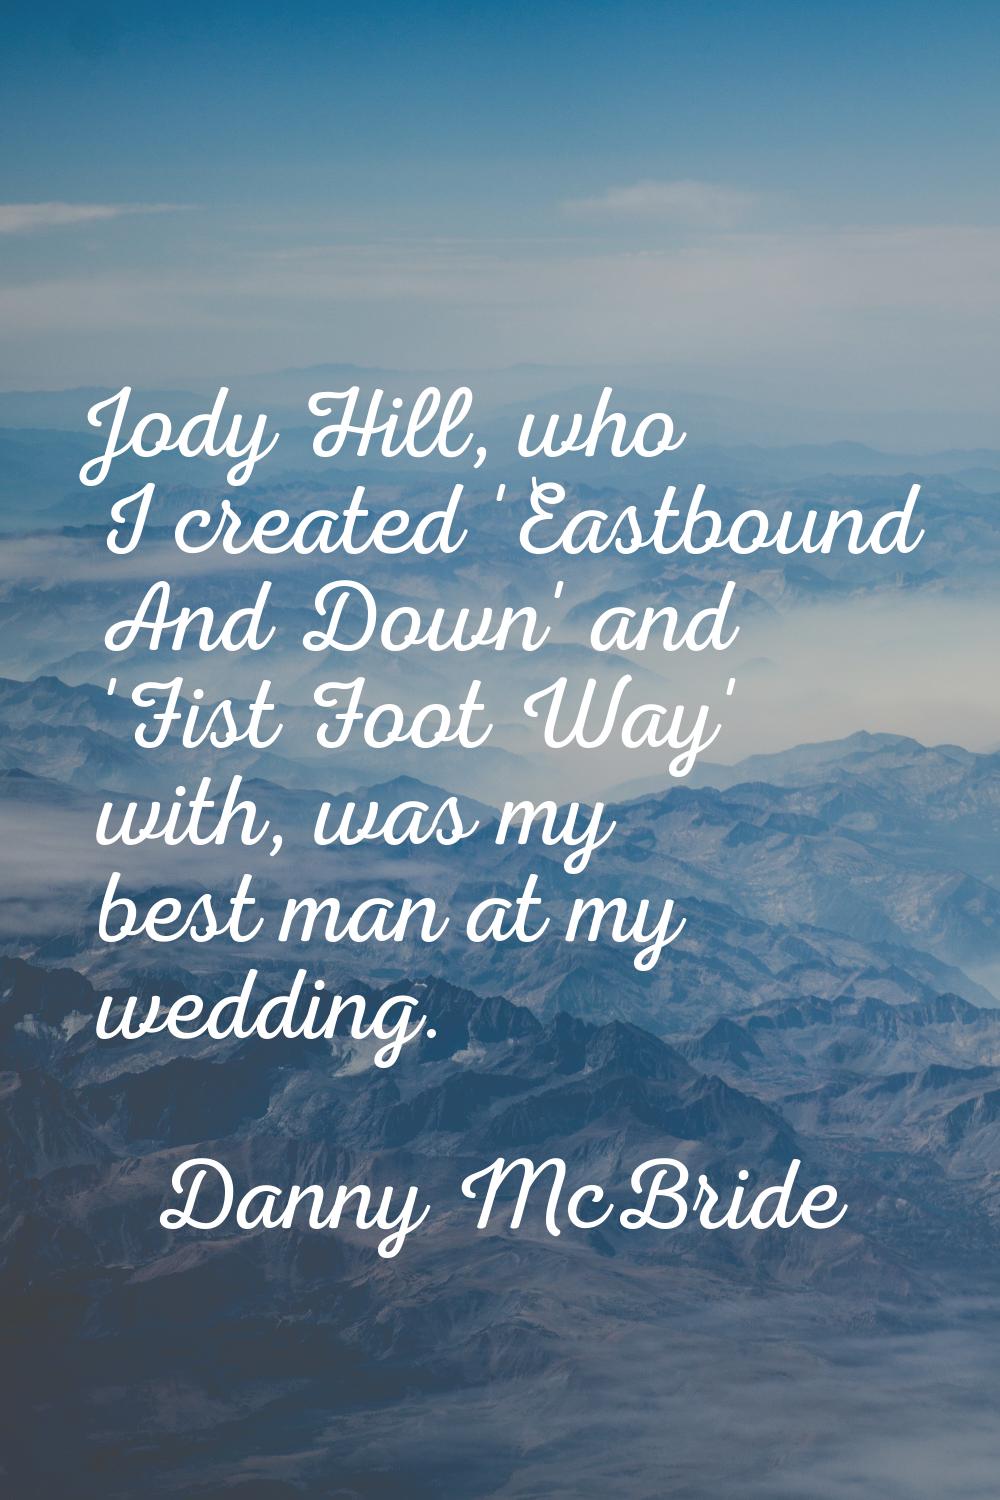 Jody Hill, who I created 'Eastbound And Down' and 'Fist Foot Way' with, was my best man at my weddi